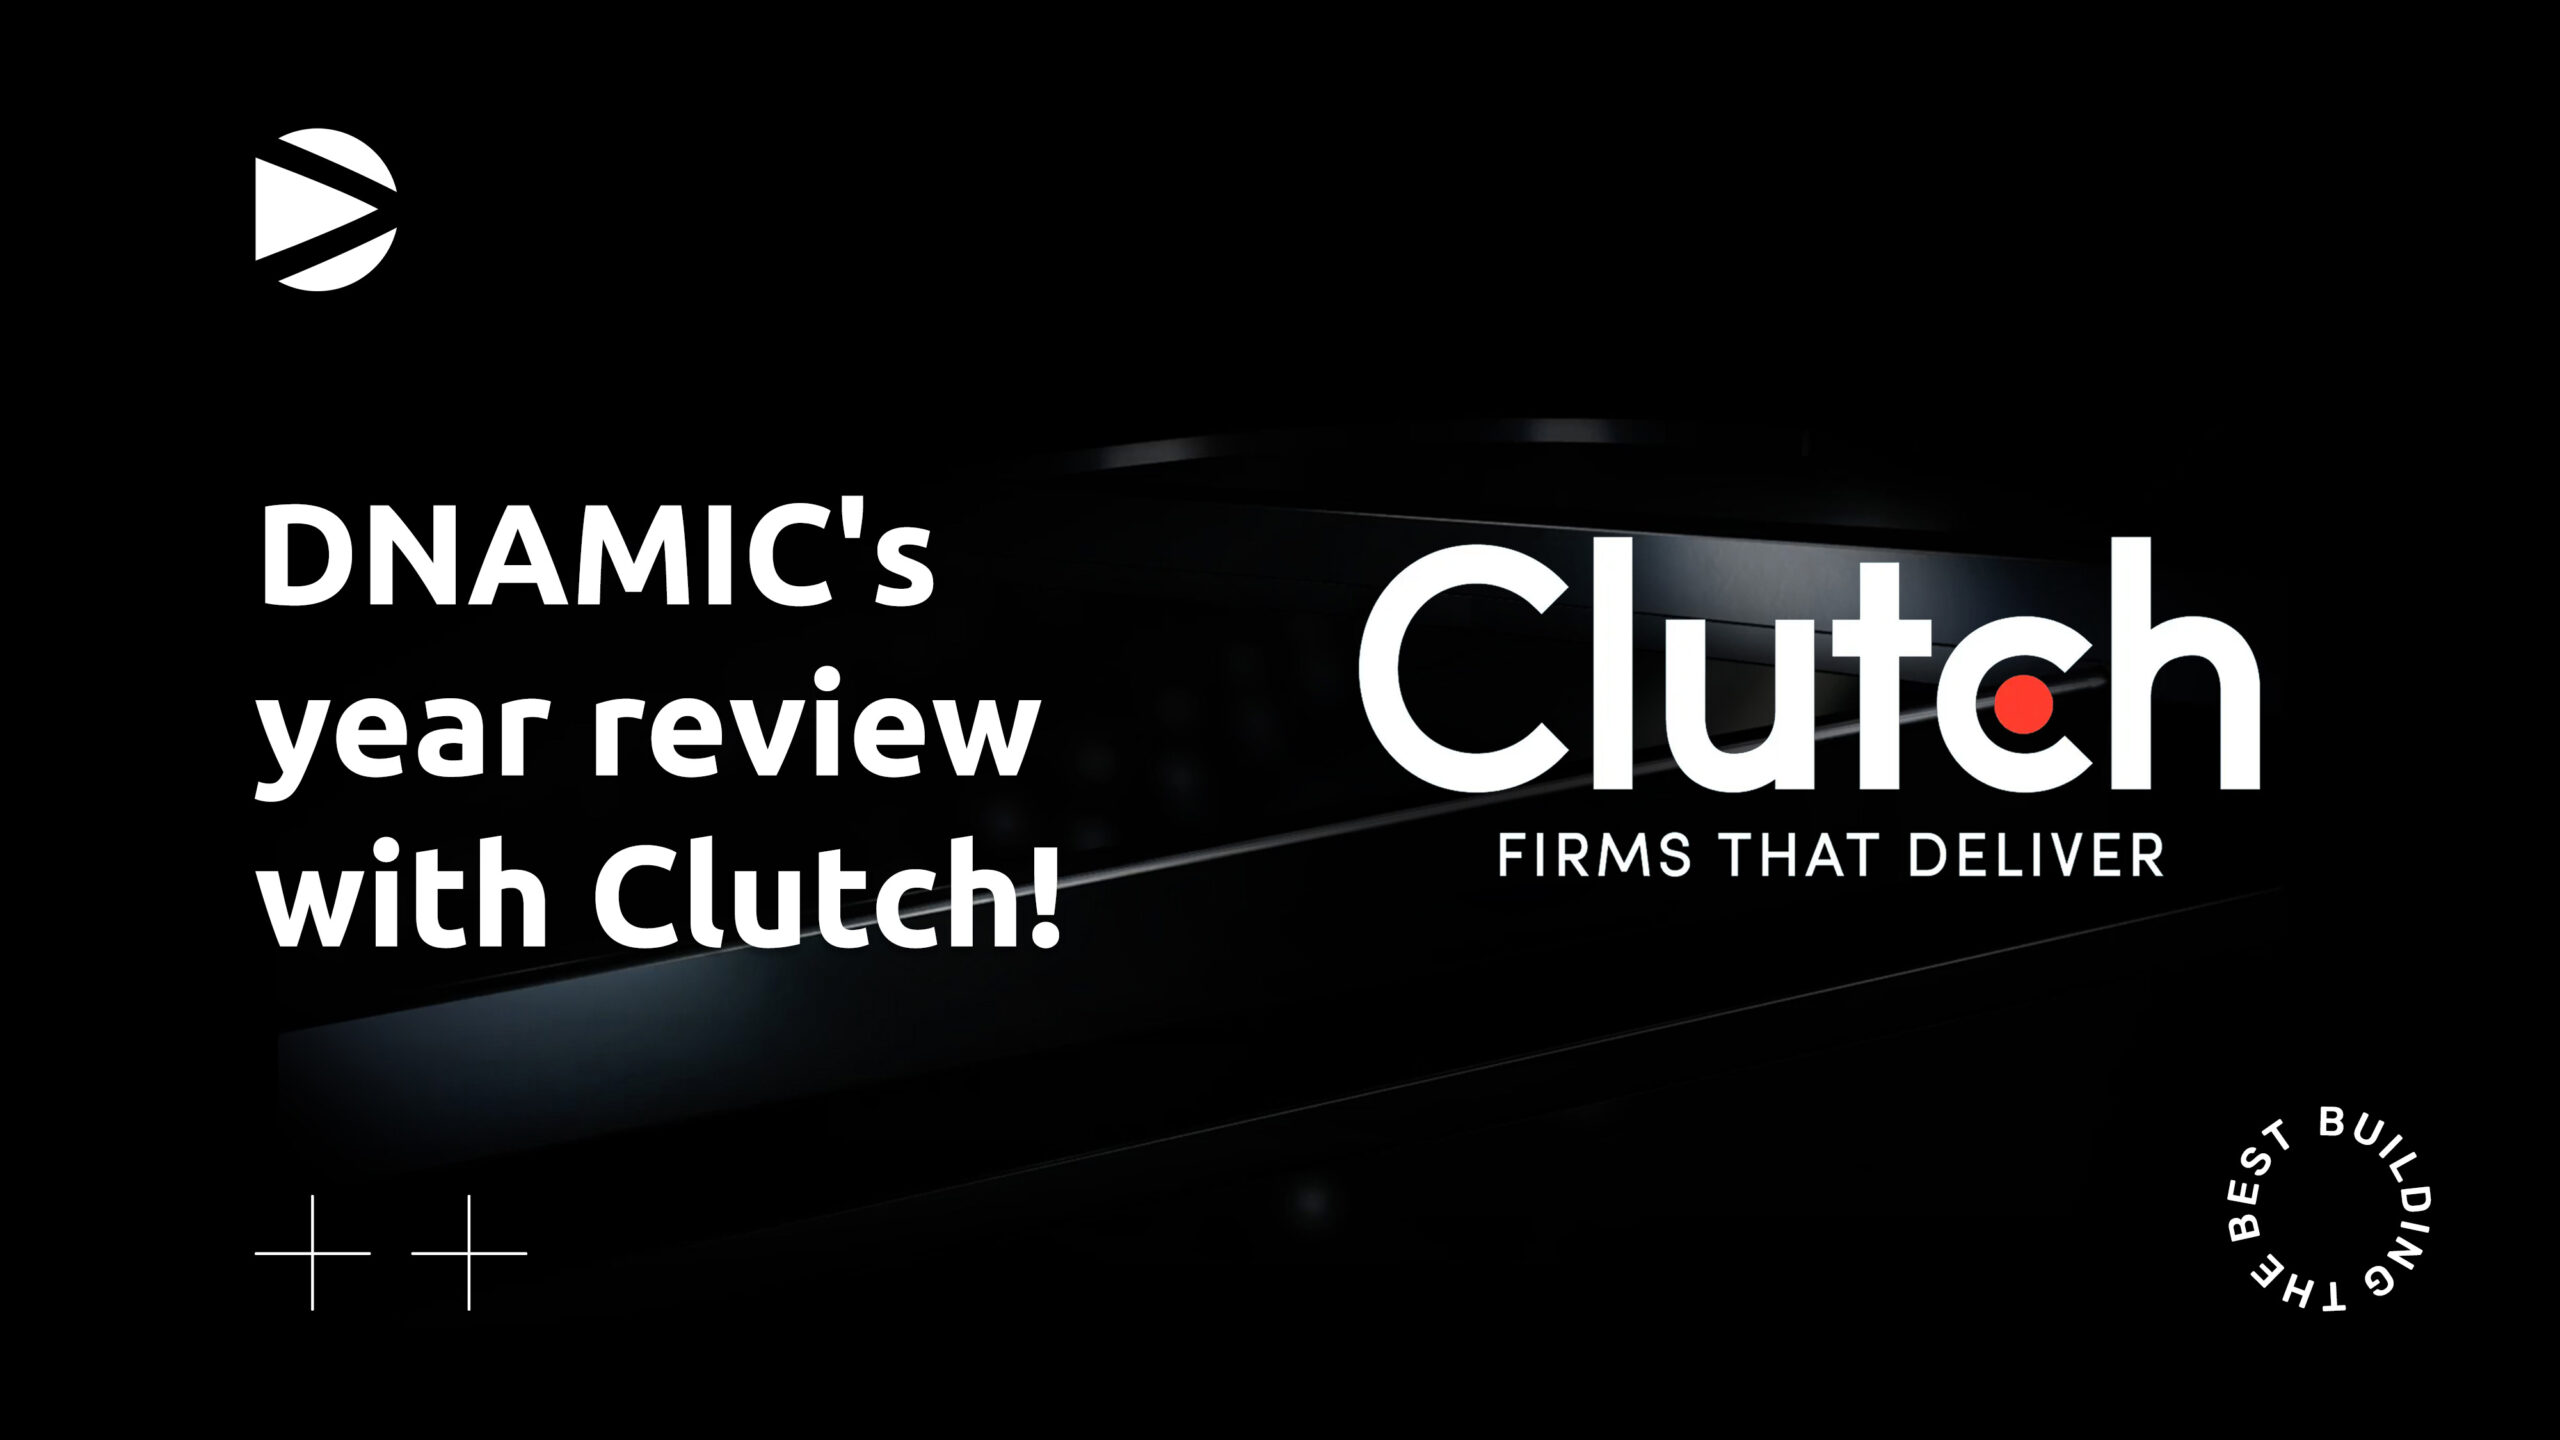 DNAMIC and Clutch logos